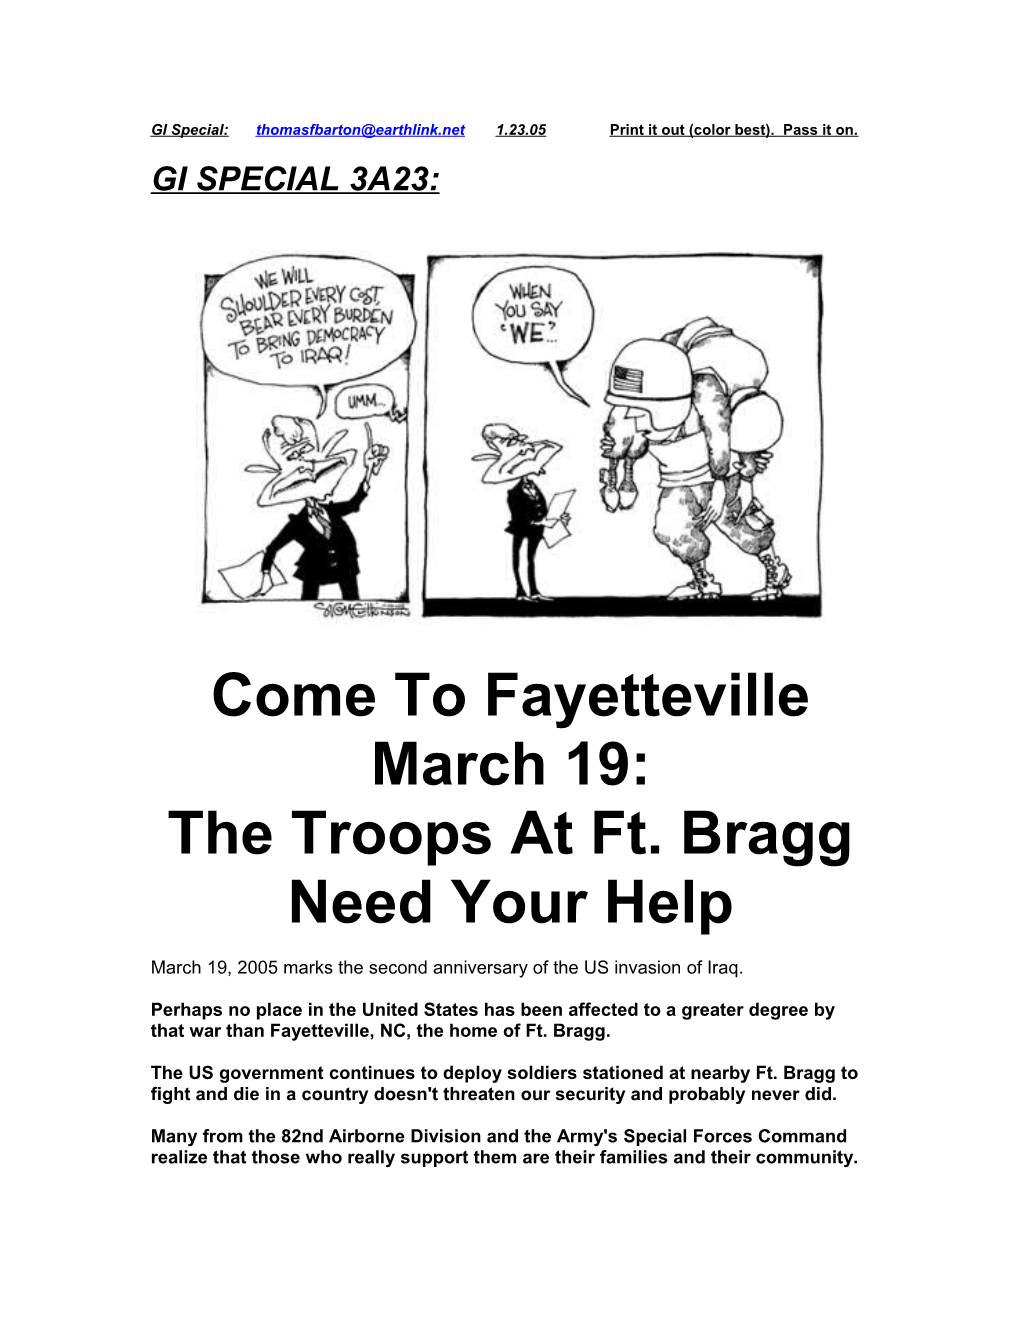 The Troops at Ft.Bragg Need Your Help